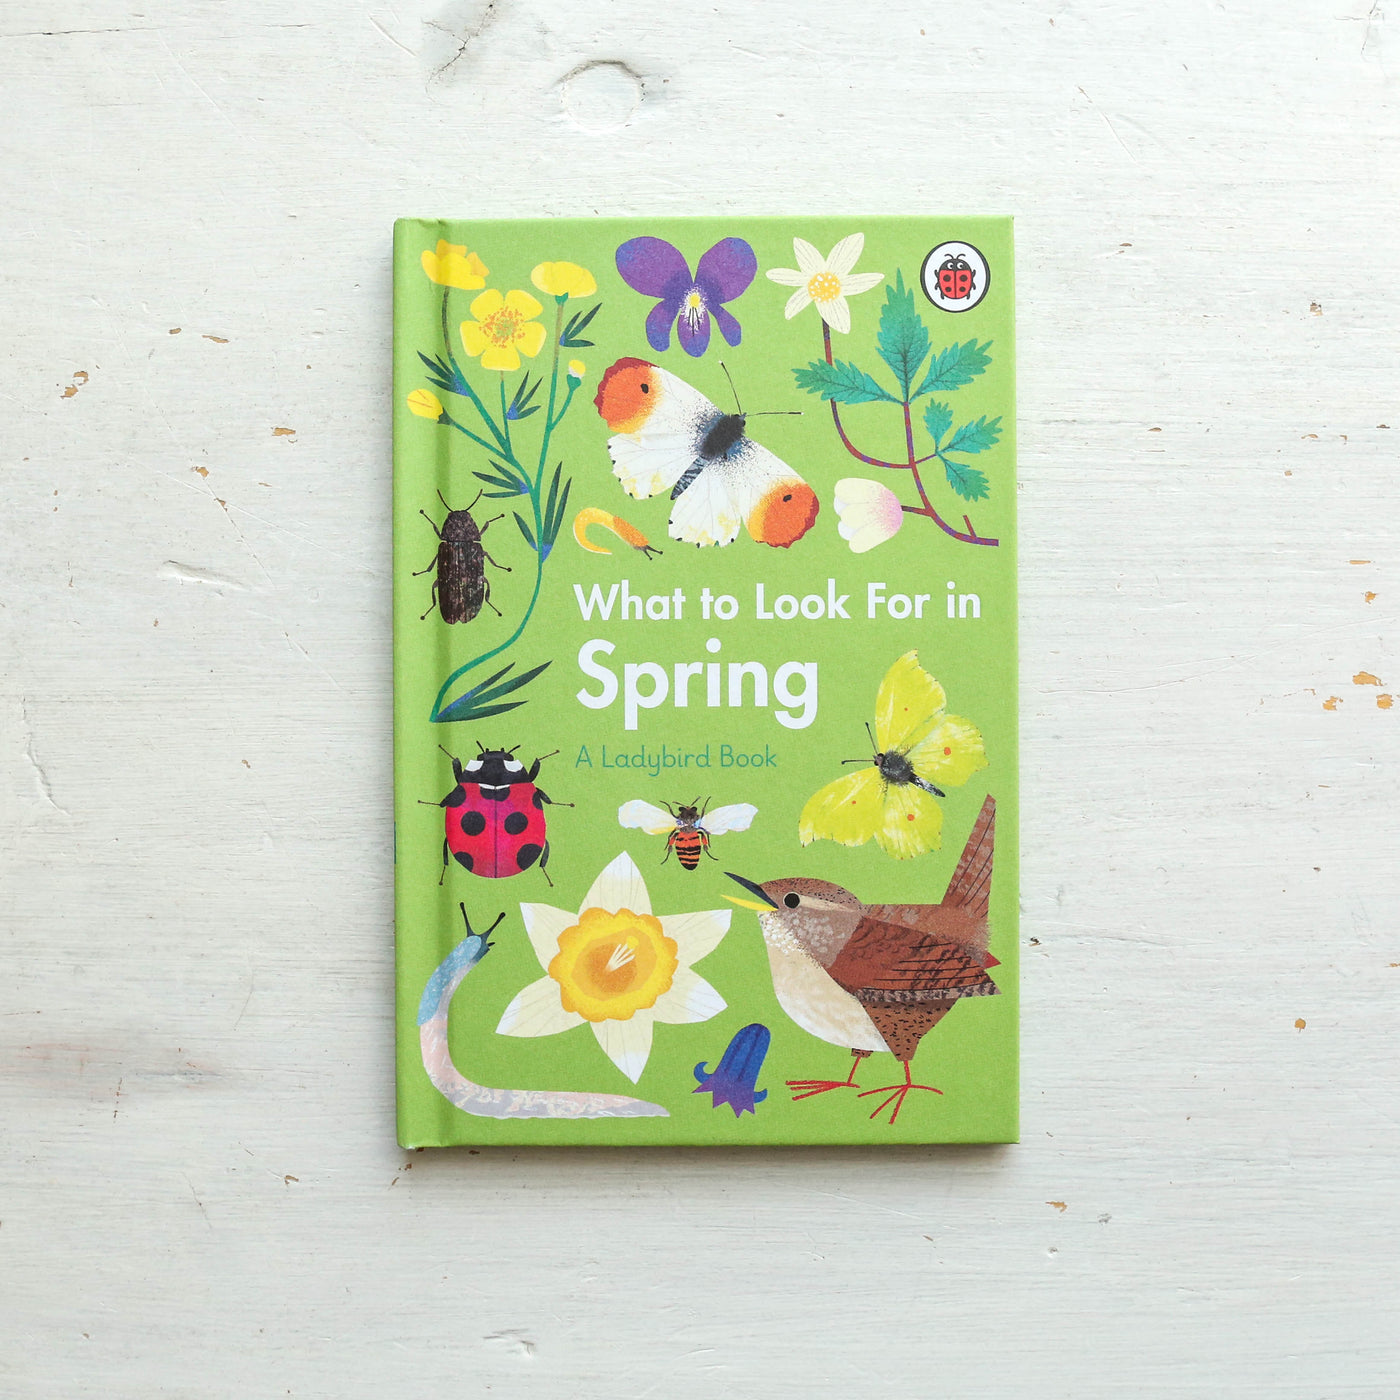 What to Look For in Spring - A Ladybird Book